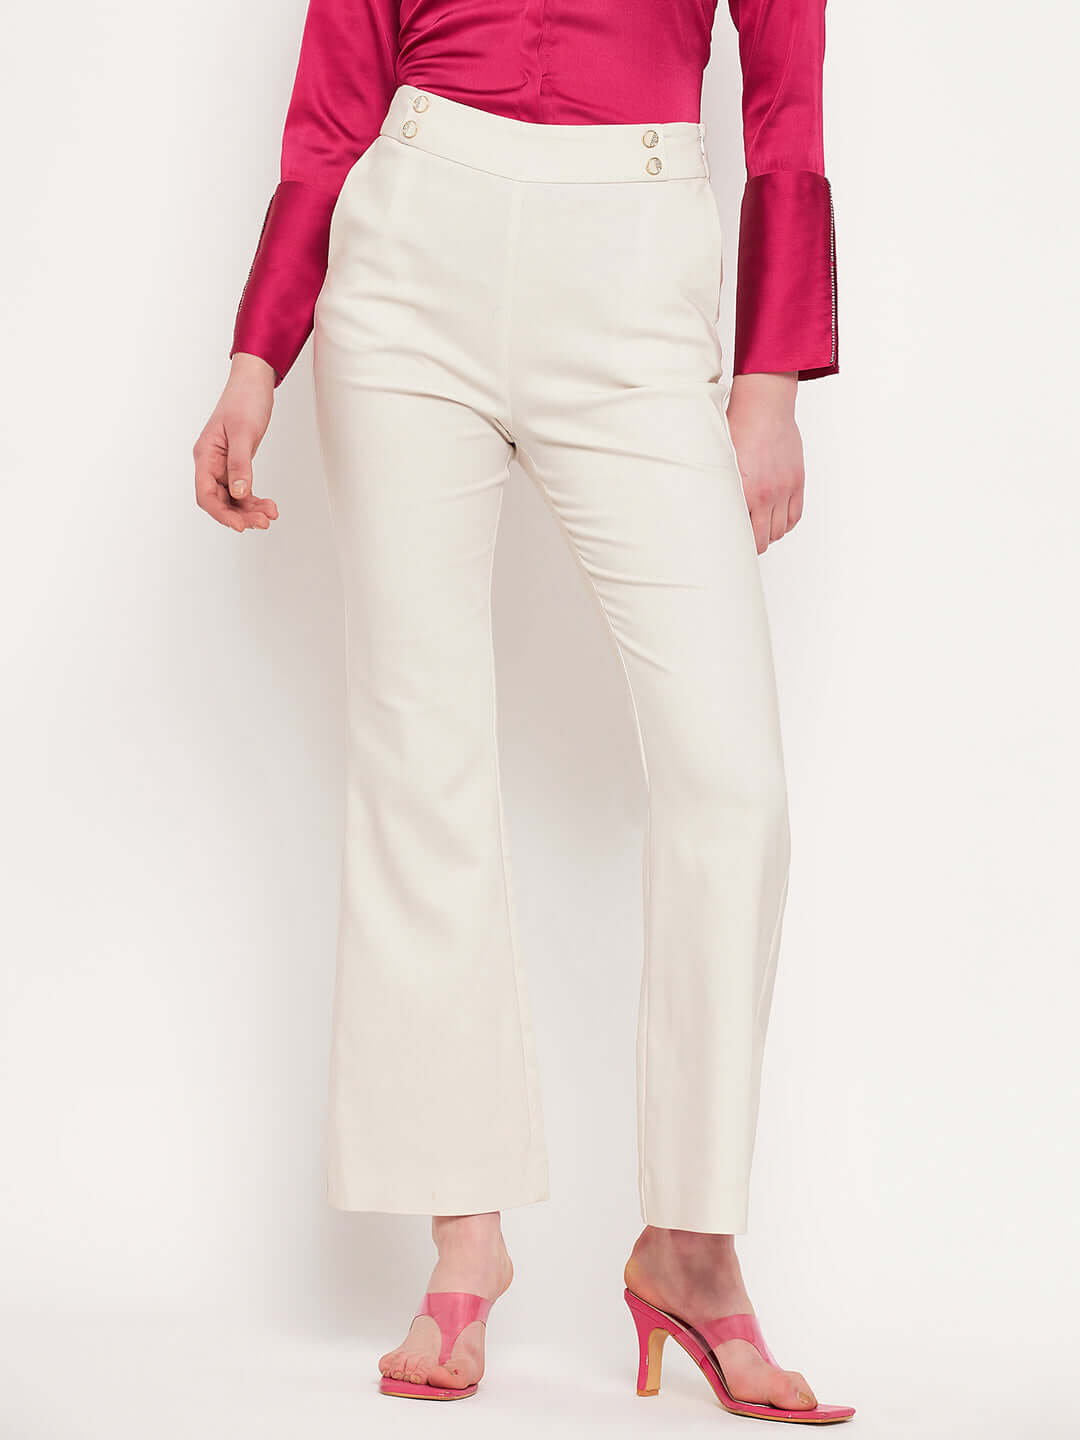 Buy MADAME Trousers online  Women  87 products  FASHIOLAin